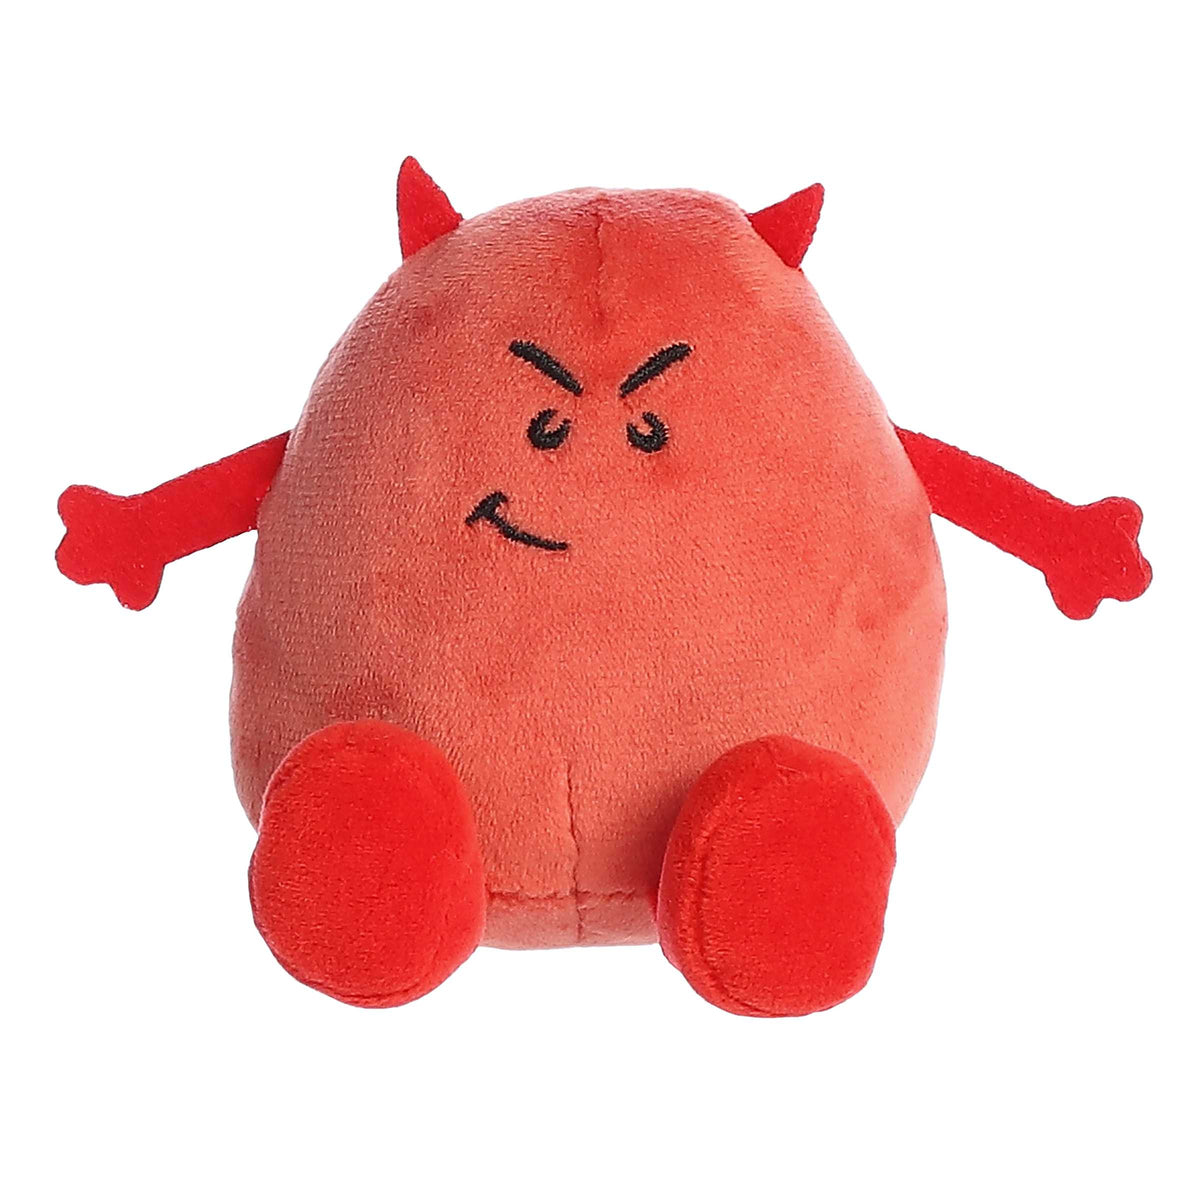 Witty egg plush toy with a red body and pointy red horns and tail, and a "Deviled Egg" expression written on its back